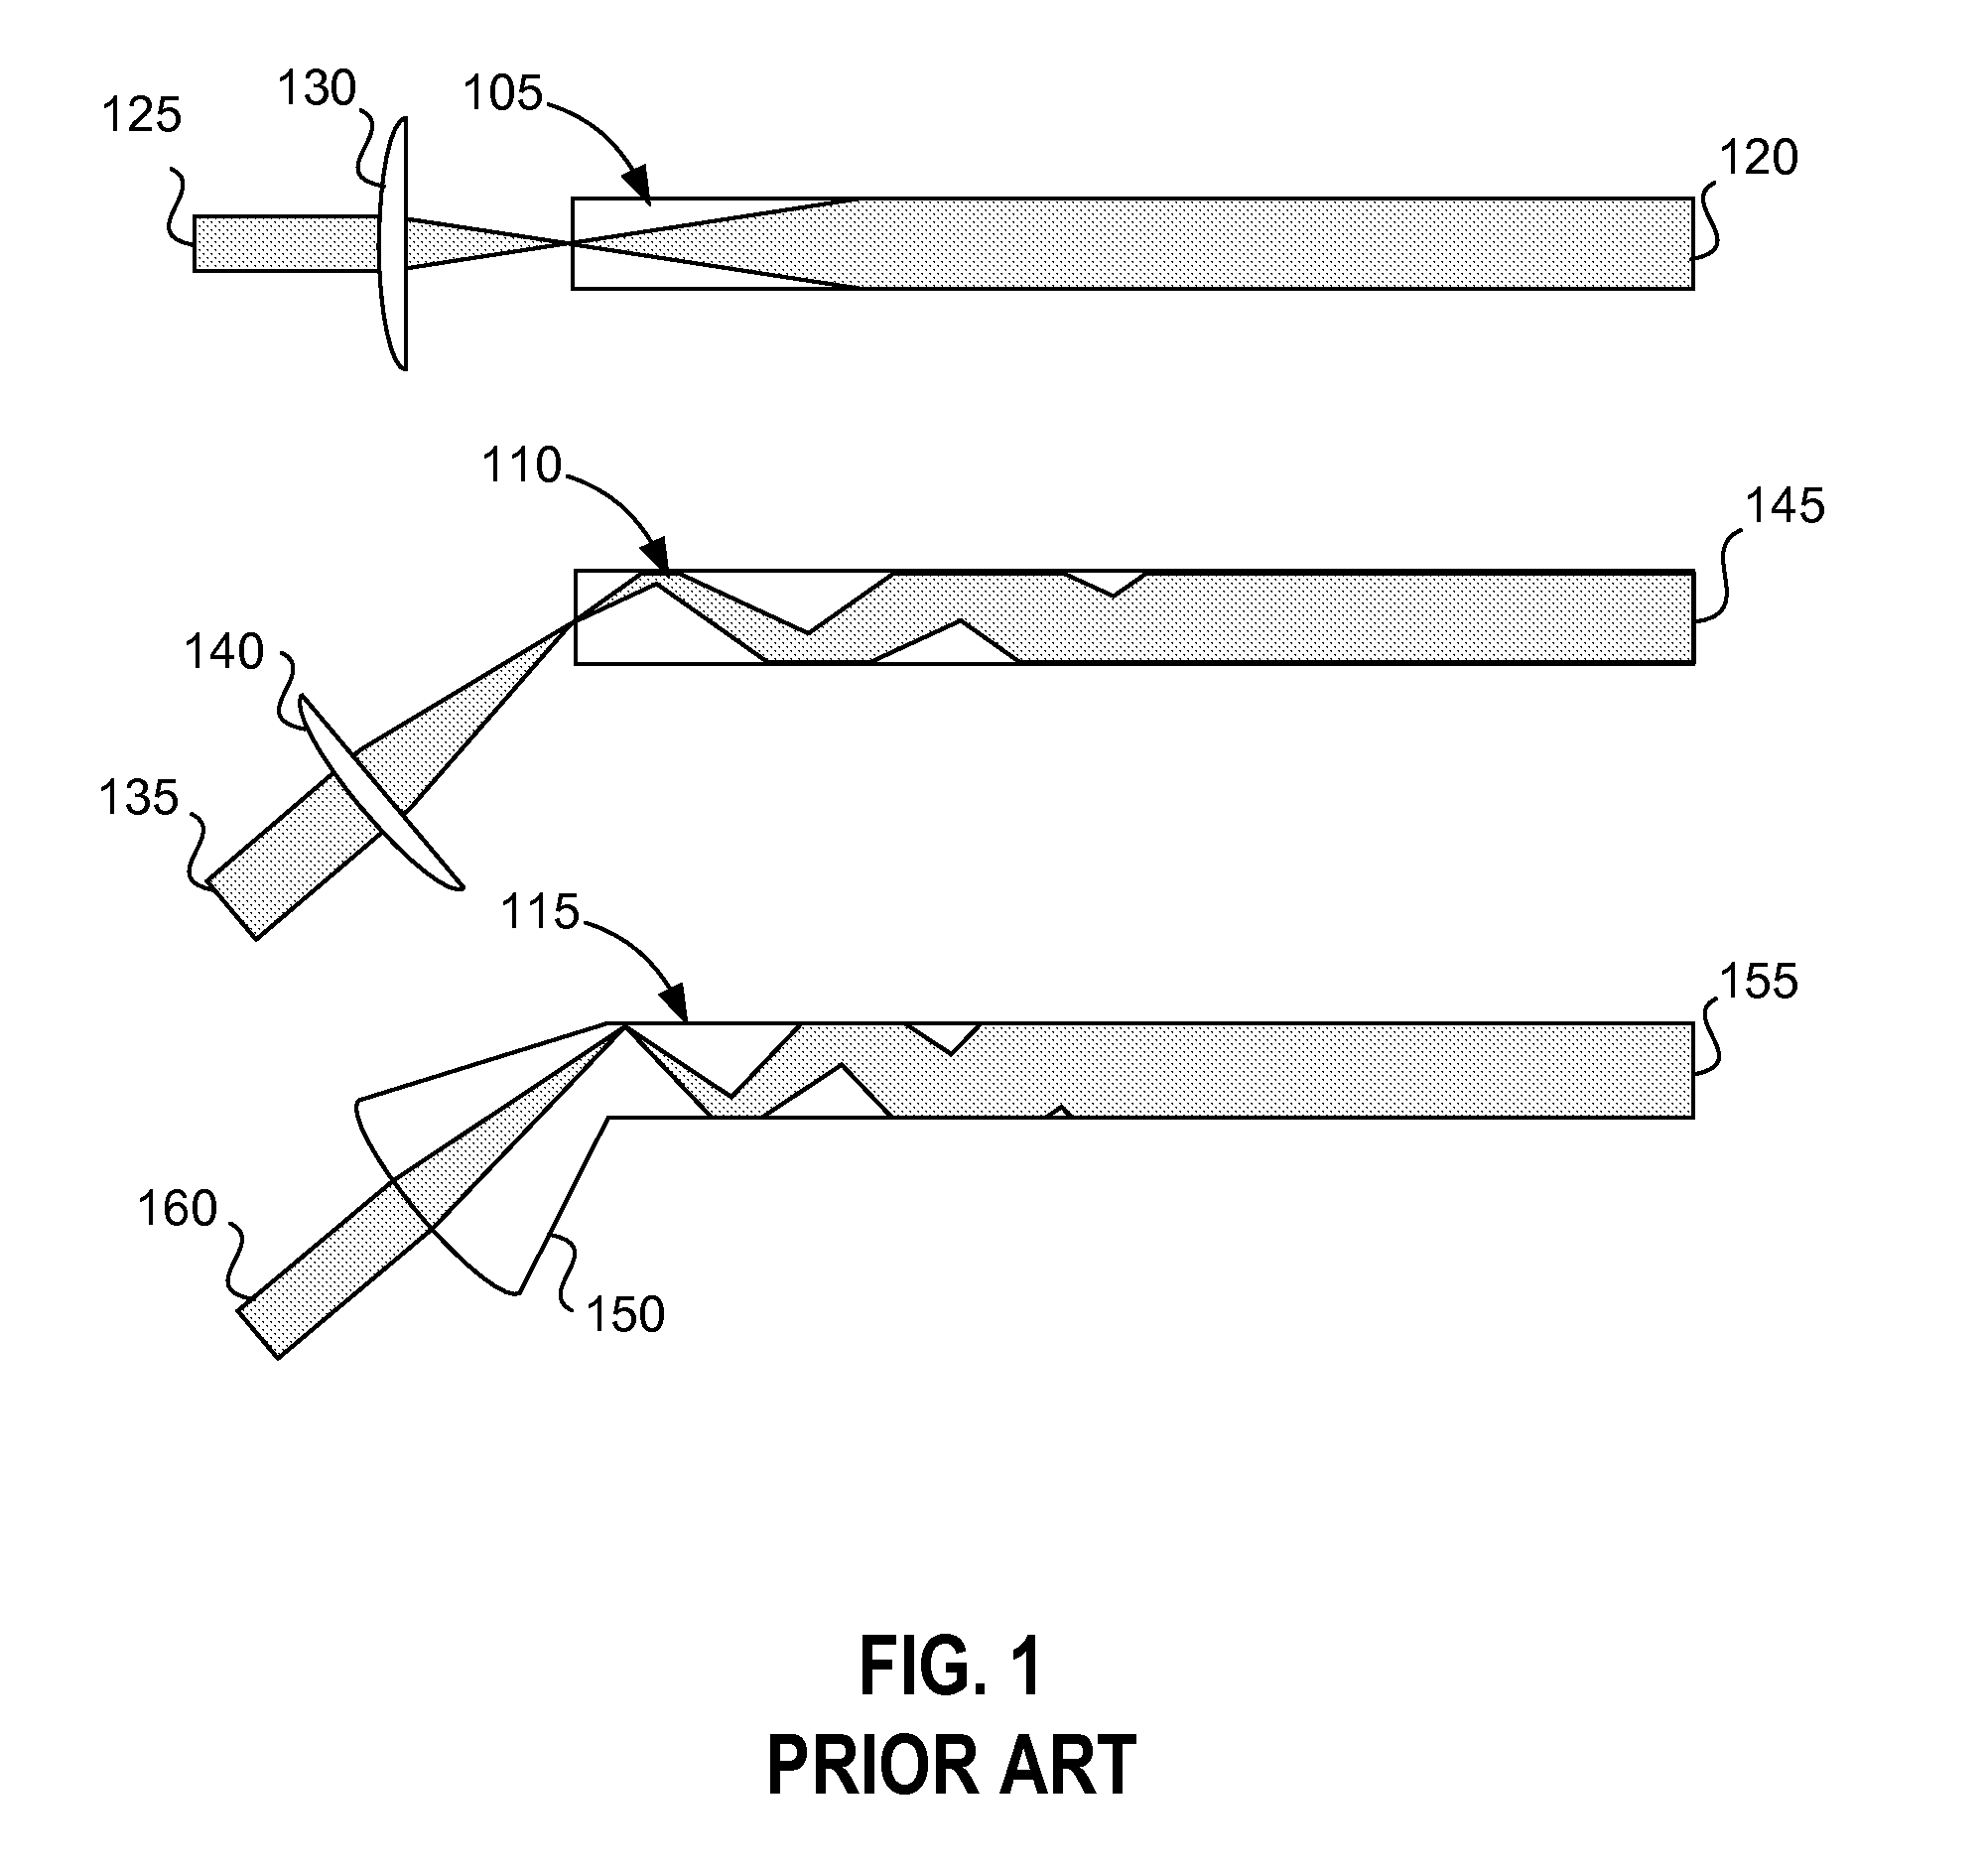 Planar optical waveguide with core of low-index-of-refraction interrogation medium